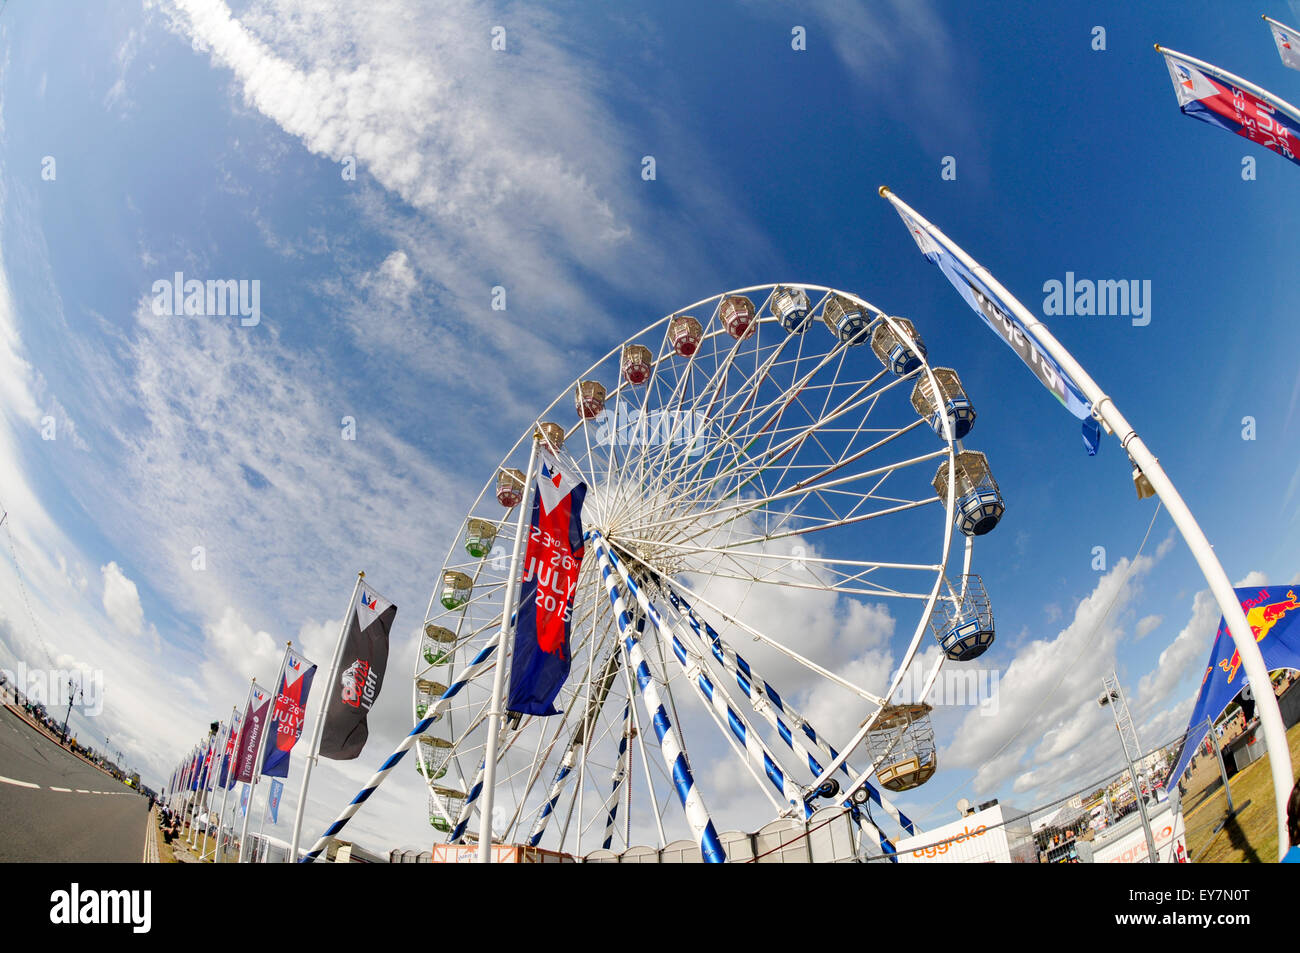 Portsmouth, UK. 23rd July, 2015. The Louis Vuitton America’s Cup World Series Portsmouth. The ferris wheel on the seafront in the 'fanzone'. Credit:  Rob Wilkinson/ Alamy Live News Stock Photo